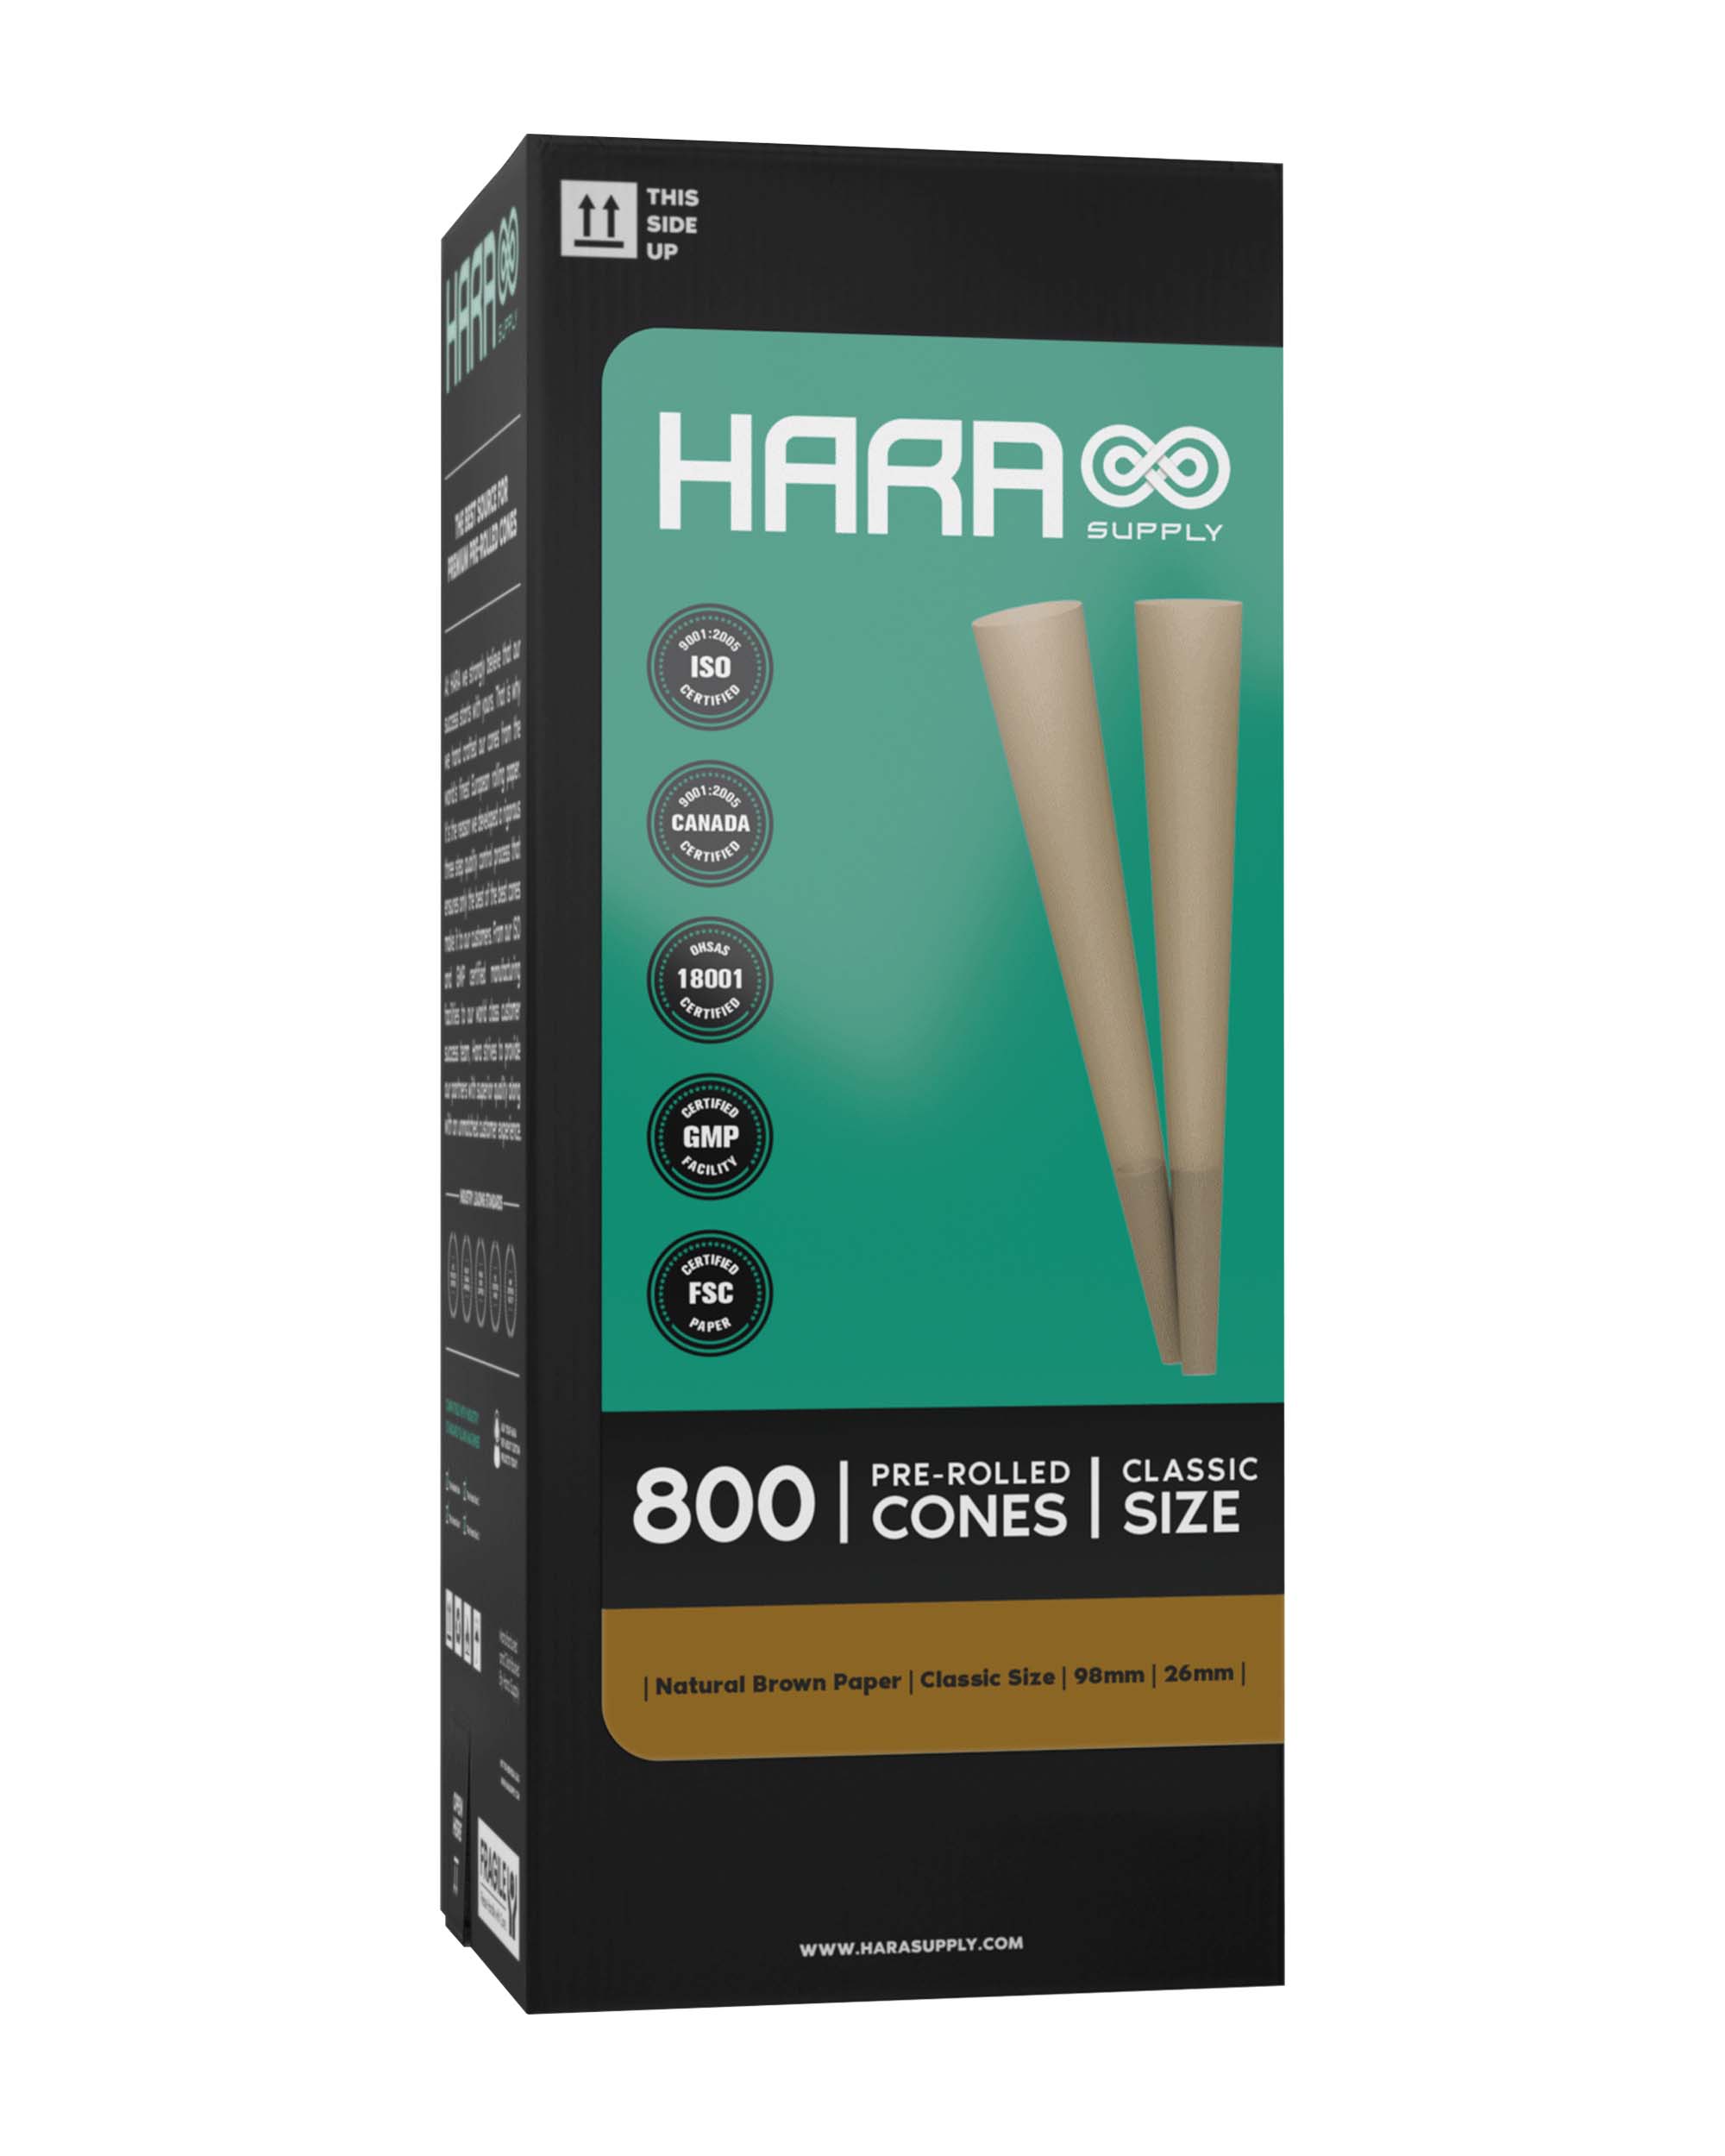 Hara Supply | Classic Size Unbleached Pre-Rolled Cones w/ Filter Tip | 98mm - Brown Paper - 800 Count